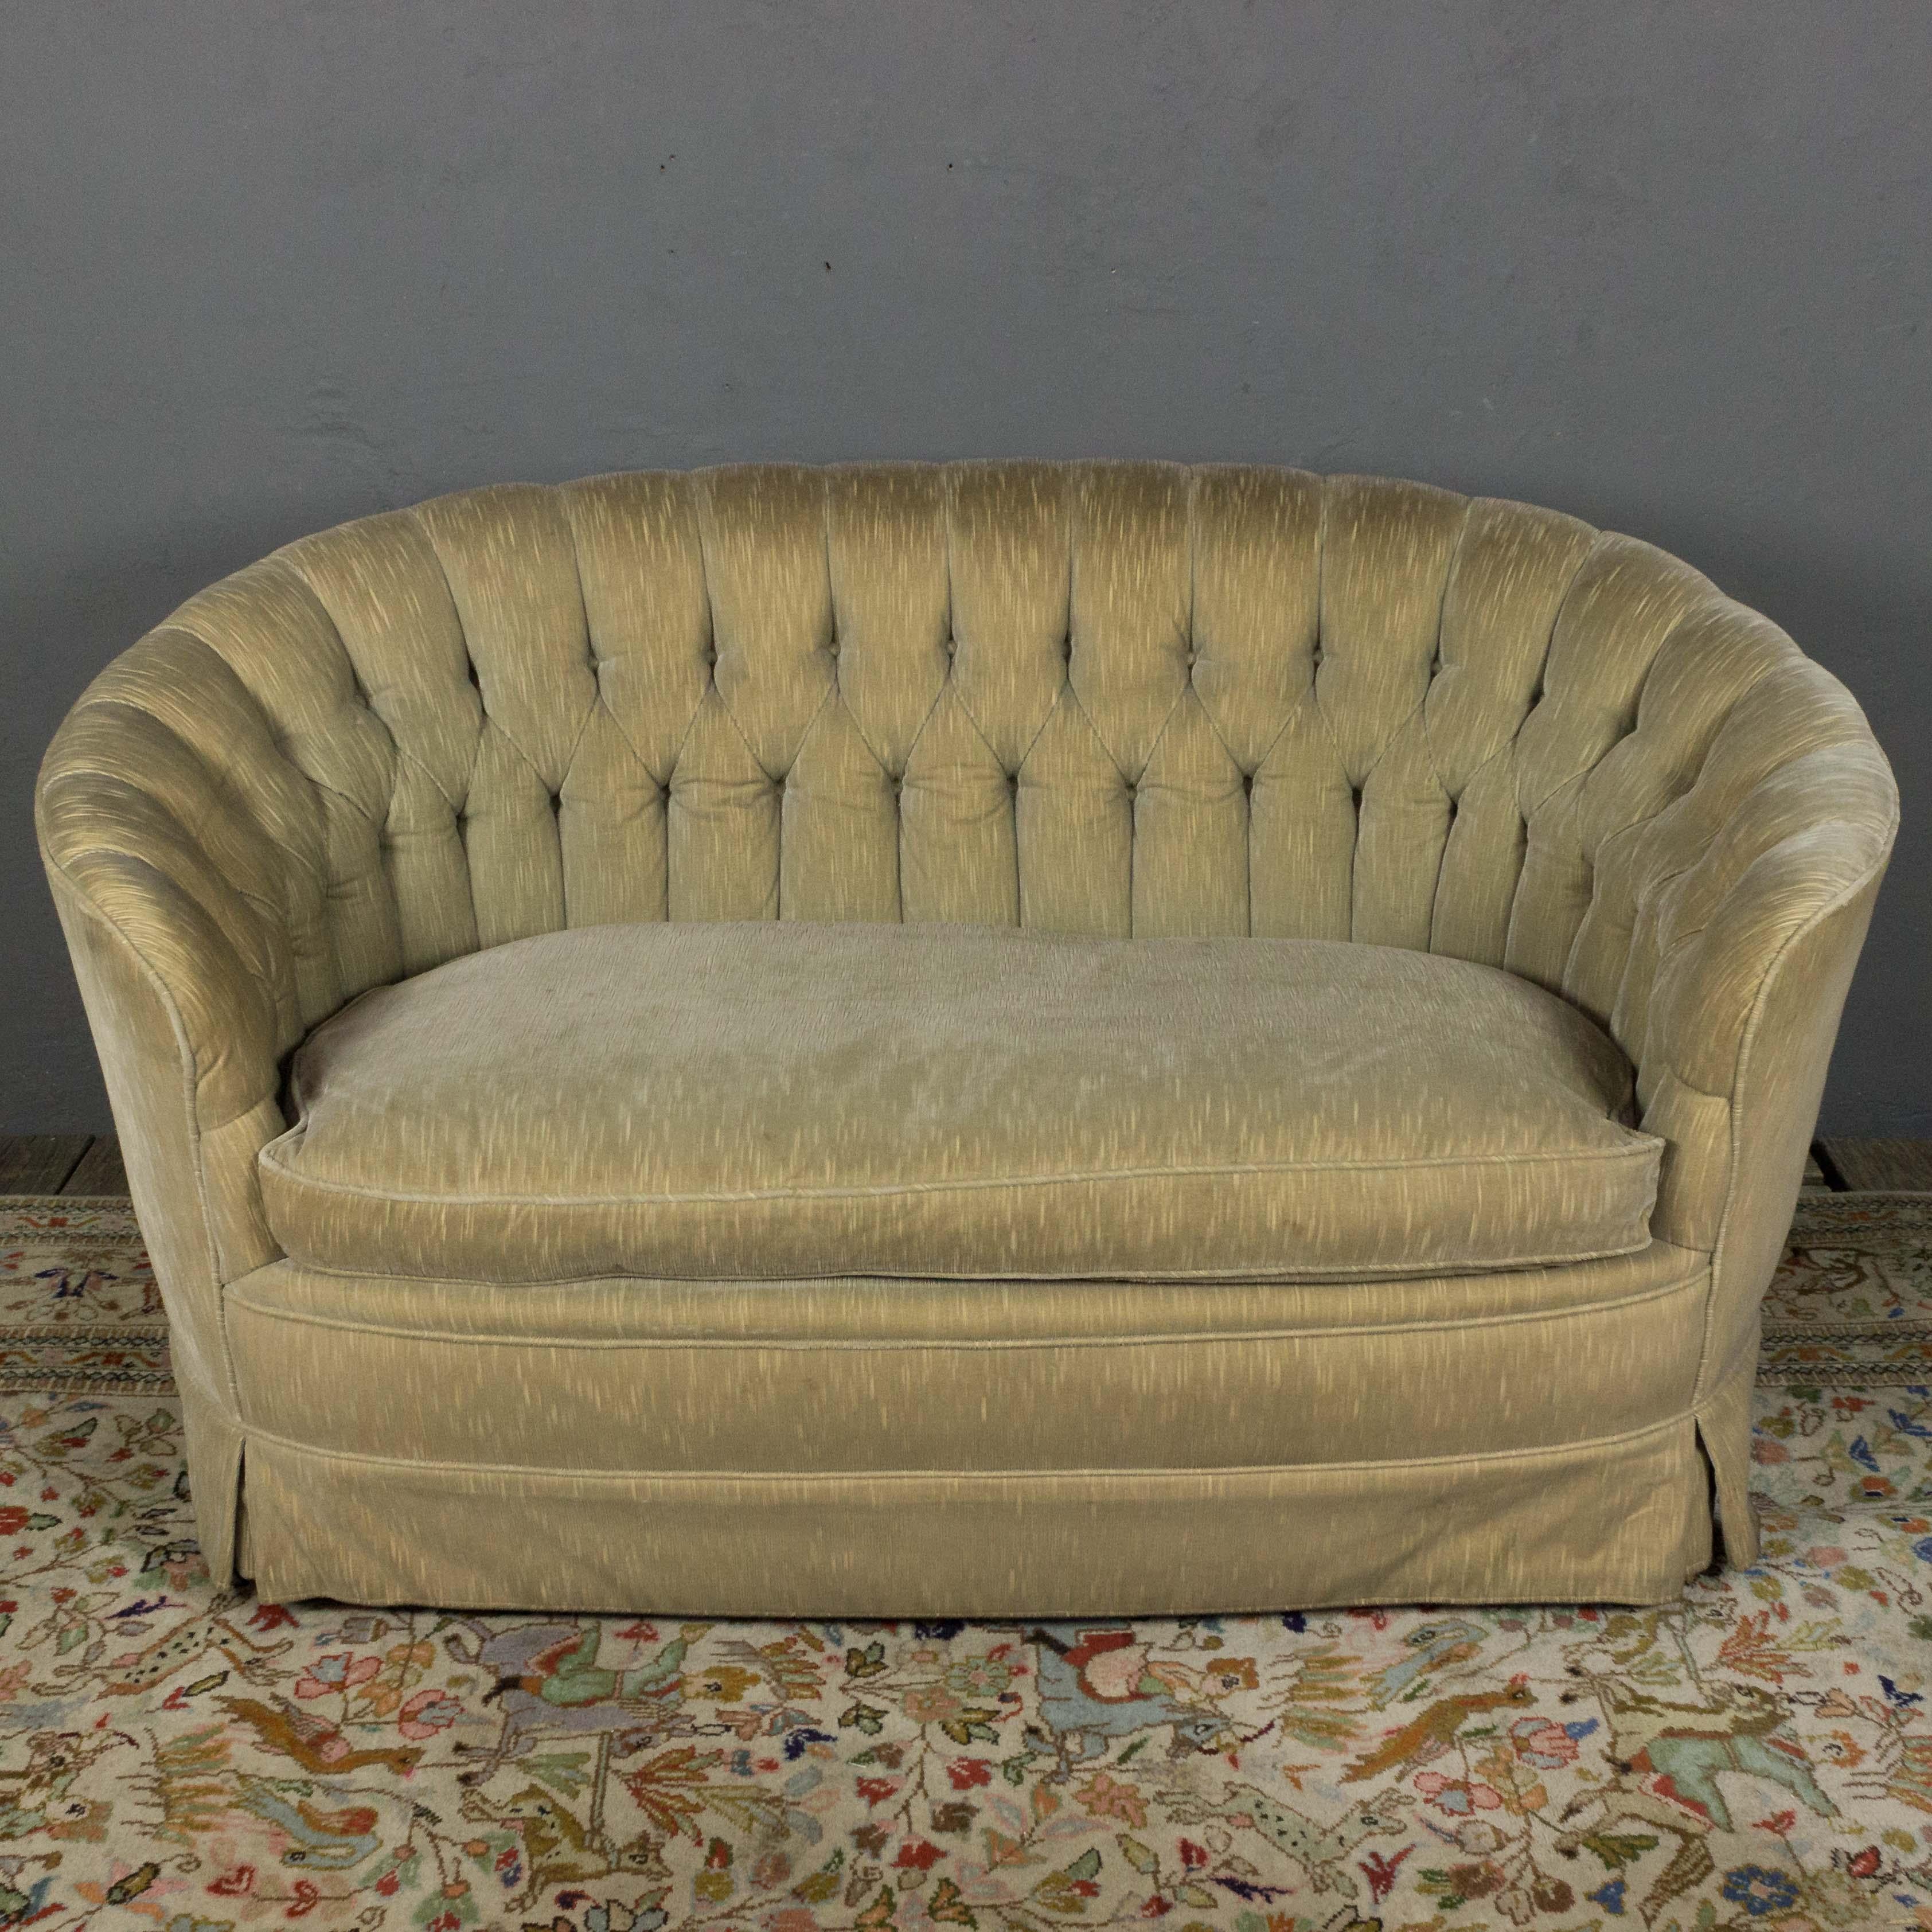 A comfortable tufted back settee with a single large seat cushion, original upholstery. American made, circa 1960. Good vintage condition. Arms will need tightening if reupholstering this piece.

 Ref #: ST0217-02

Dimensions: 30”H x 60”W x 30”D